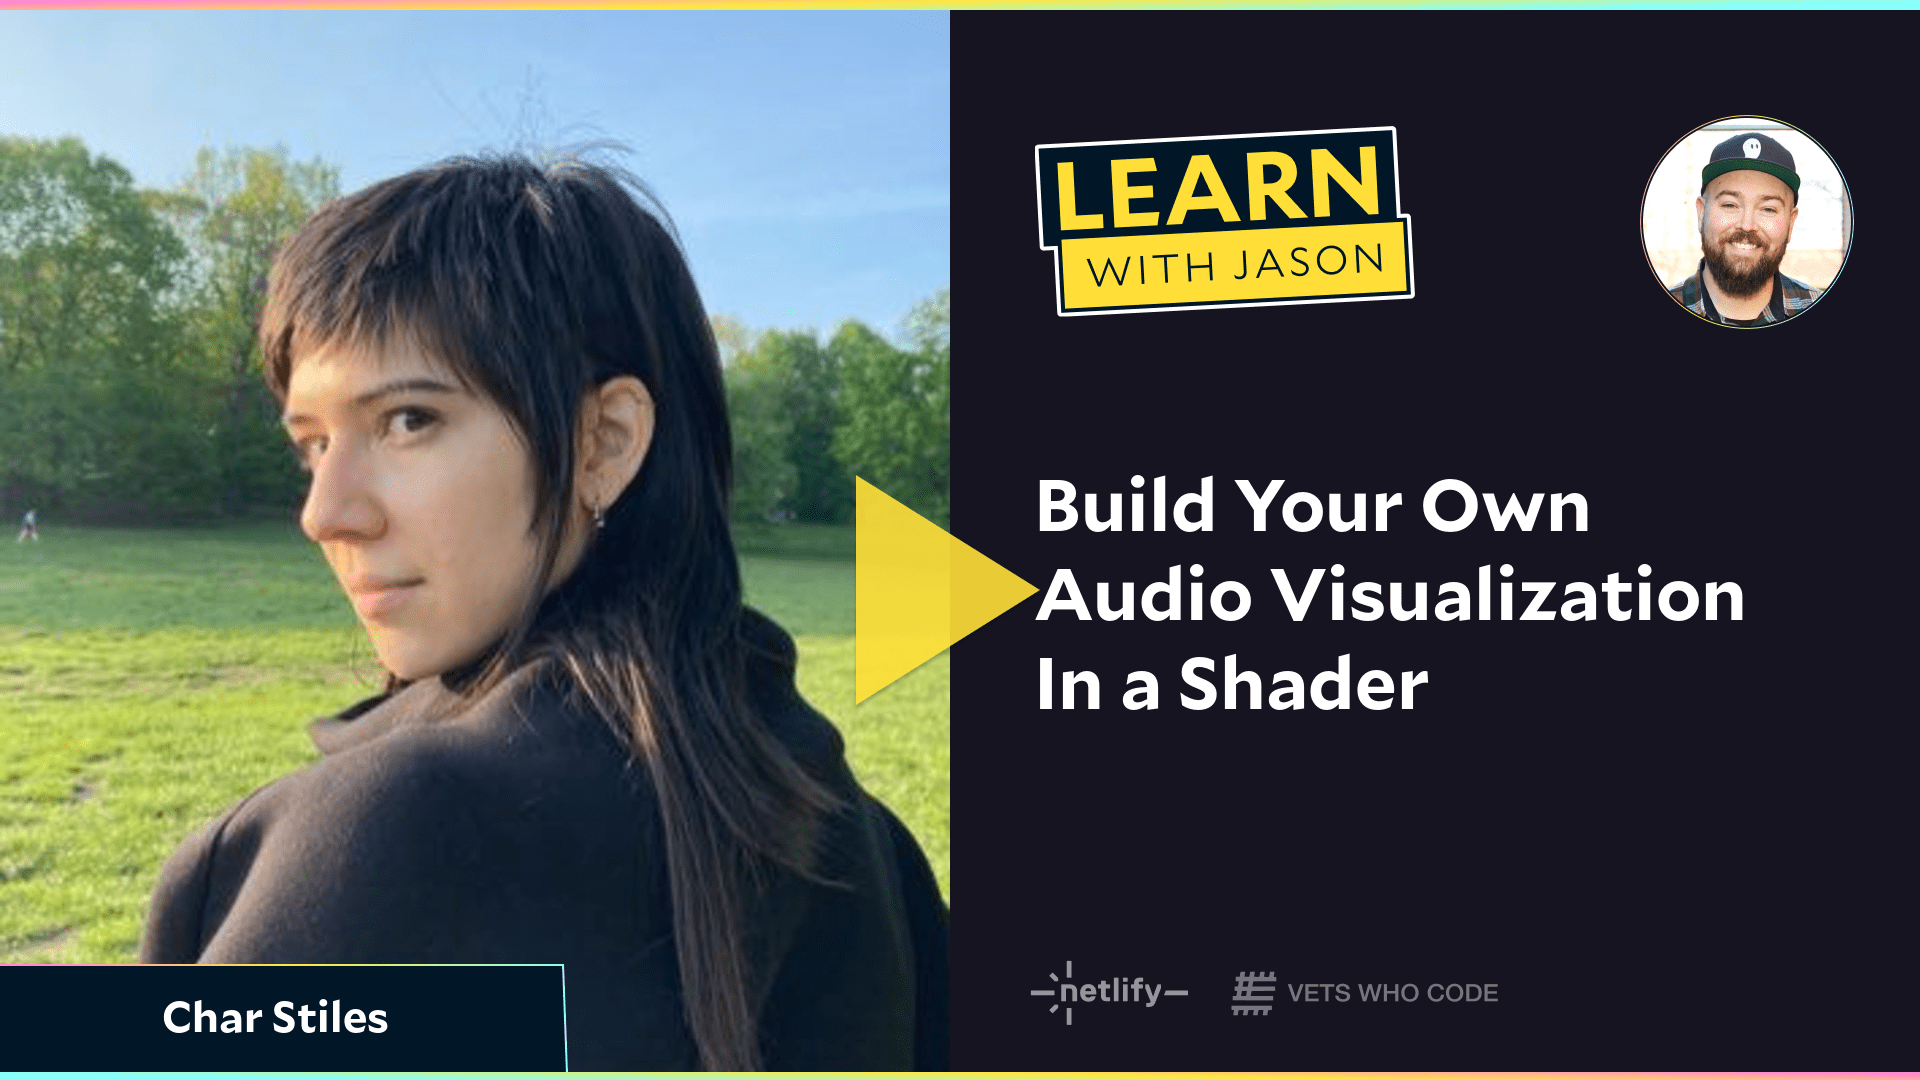 Build Your Own Audio Visualization In a Shader (with Char Stiles)